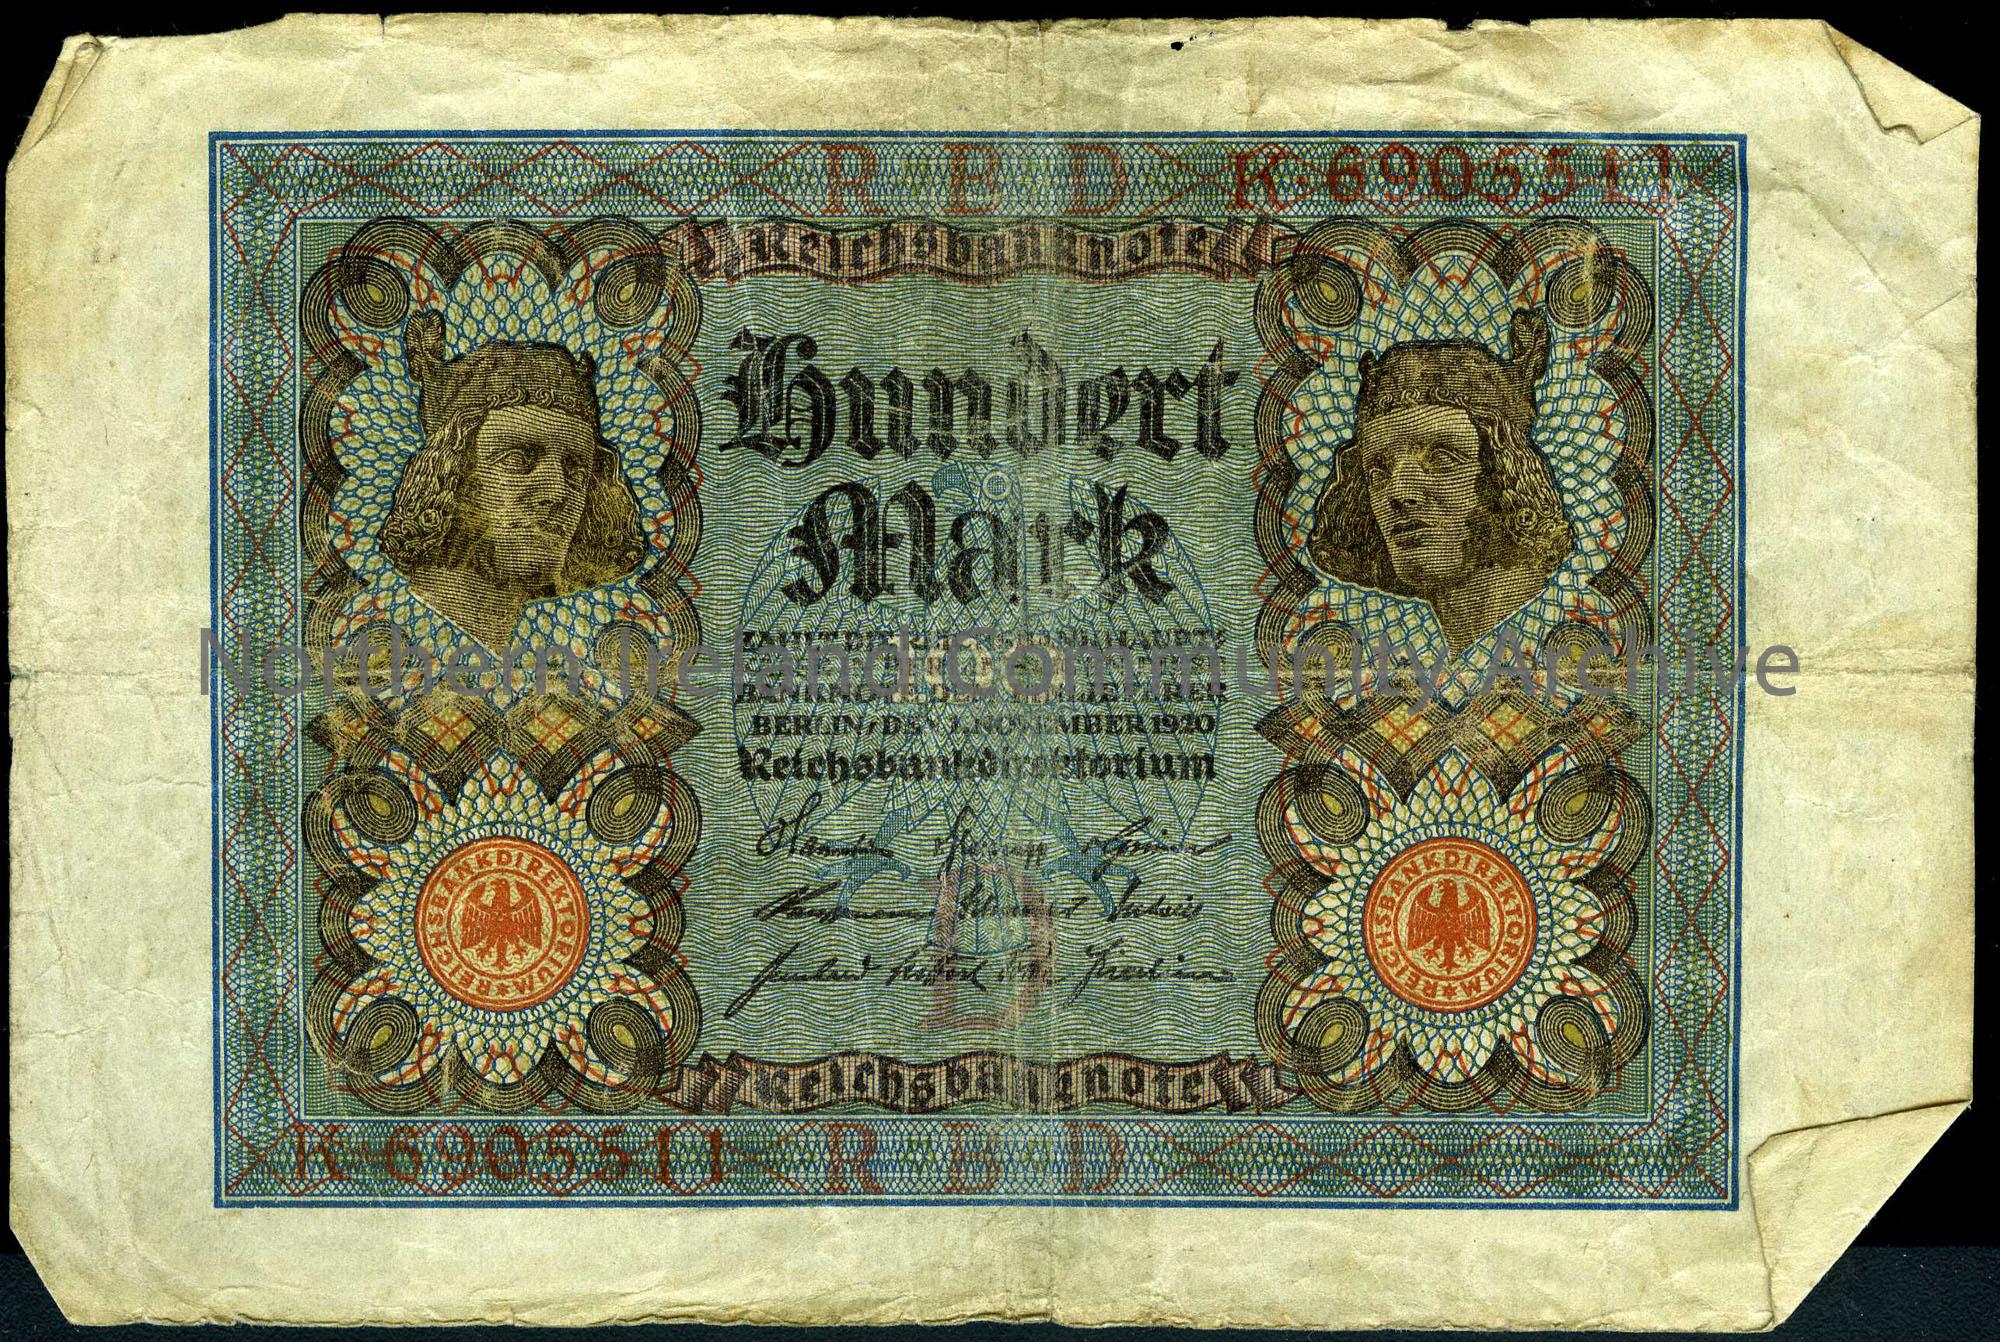 German bank note for 100 marks (5174)